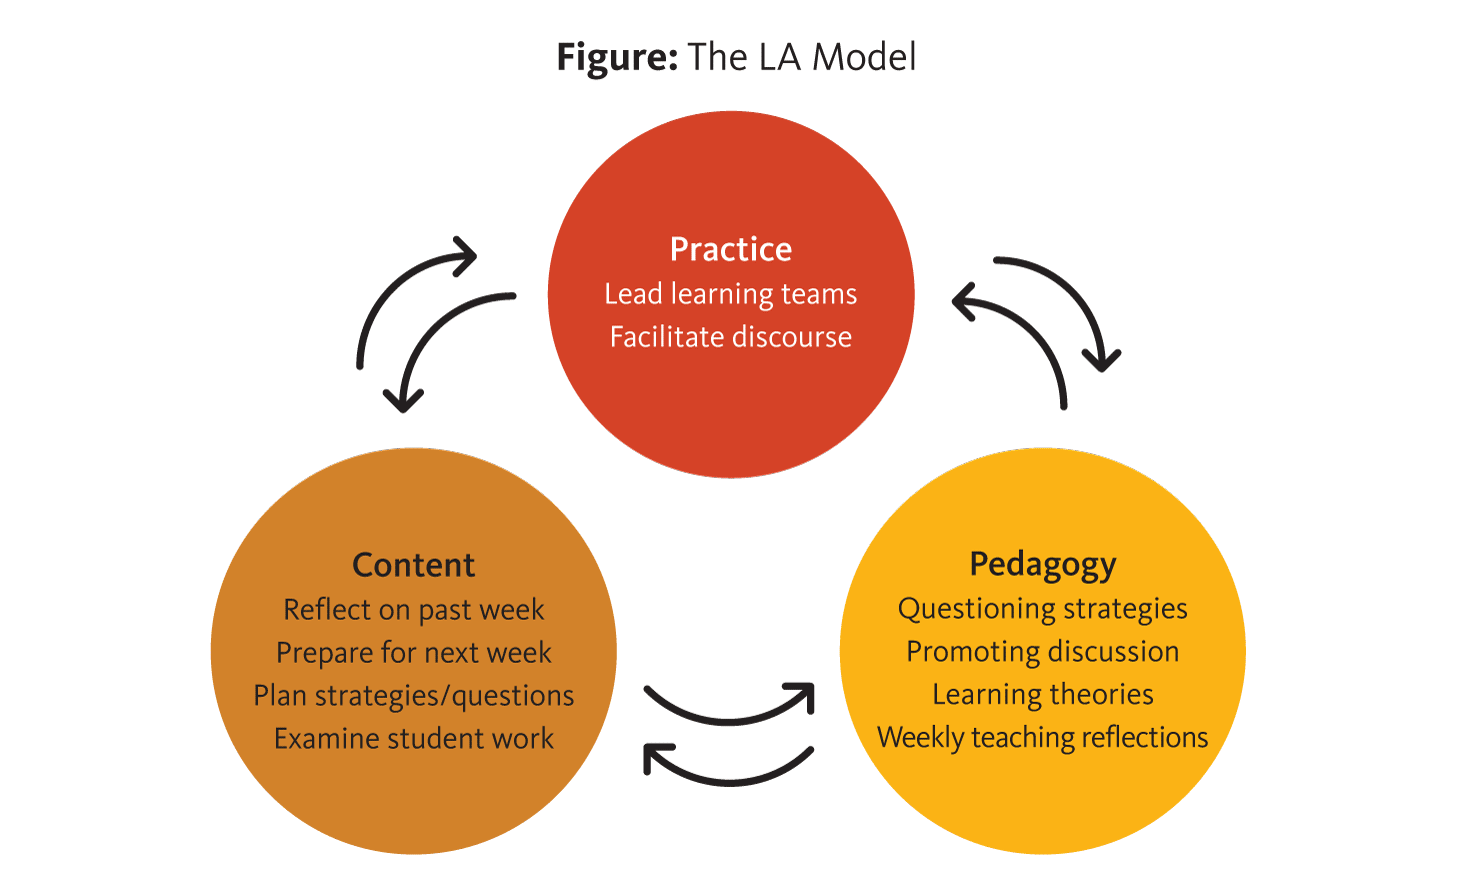 Three key elements define the LA Model: practice, pedagogy and content. This figure shows the relationship between these elements. Each element is in a distinct circle but connected to each other element by a double-sided arrow. For the full text of this figure, an accessible download is available in the following link.